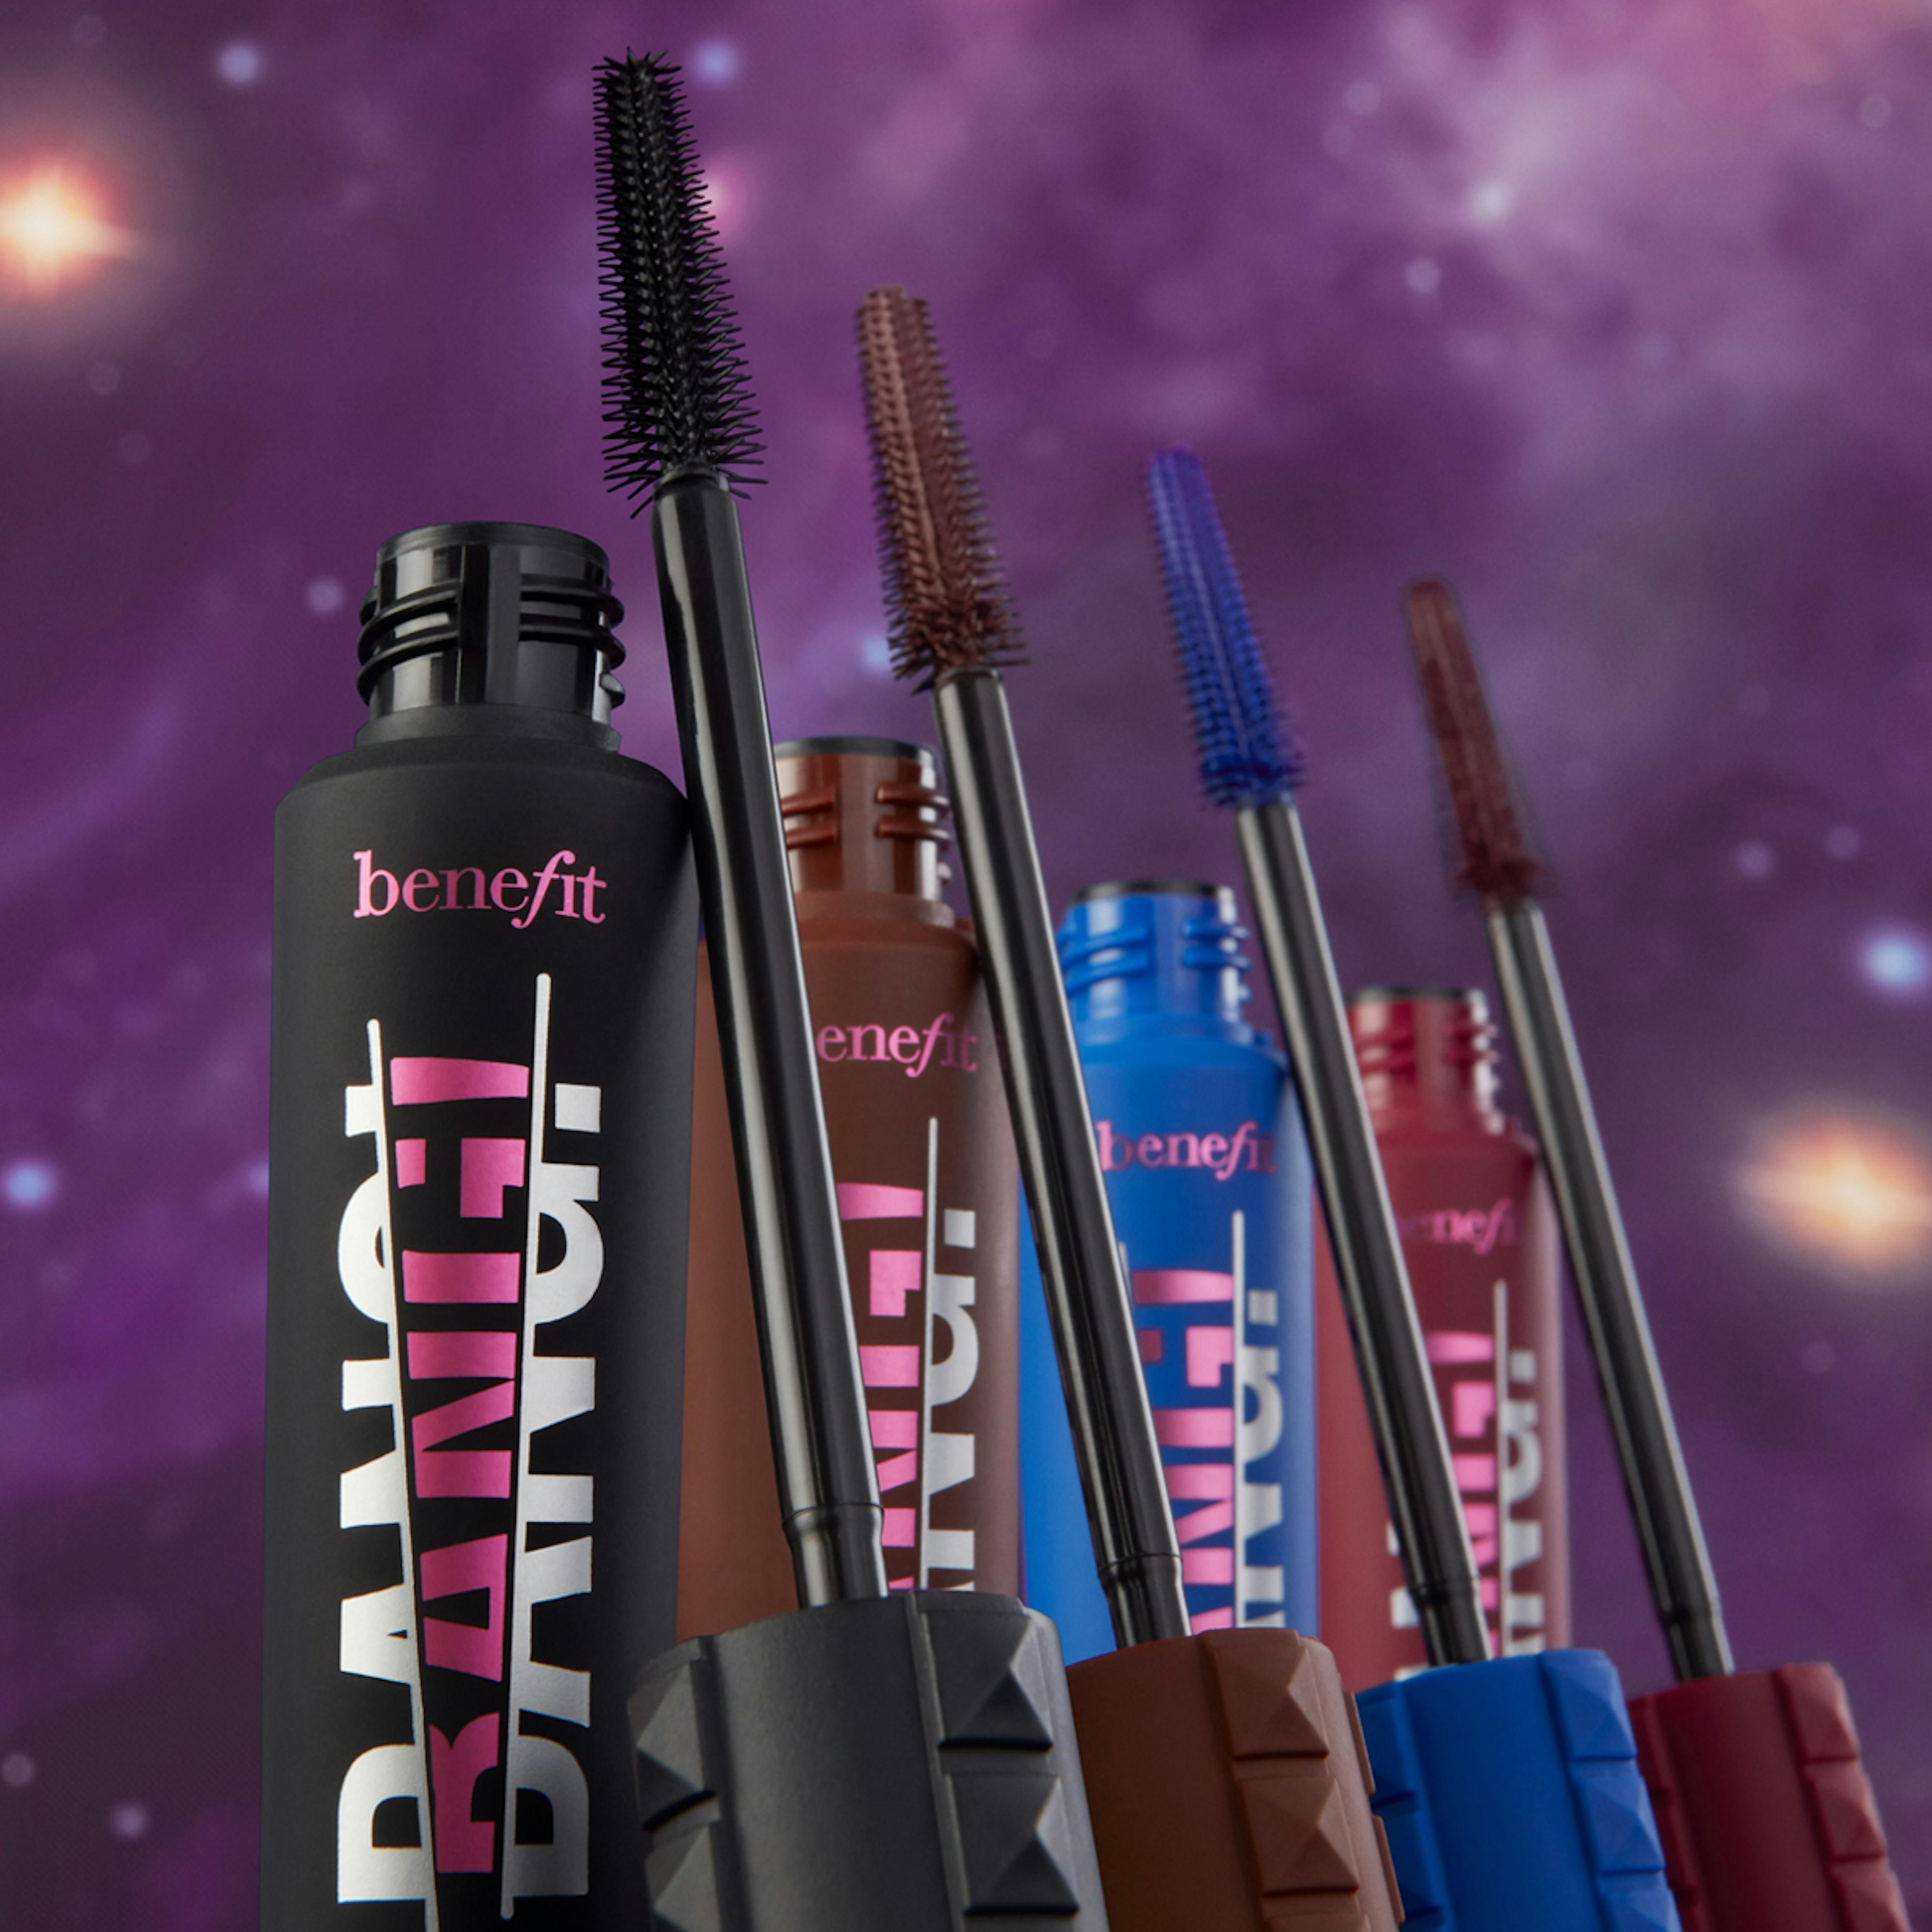 One BADgal BANG! volumizing mascara is sold every 9 seconds.*  *Source: Benefit Cosmetics, based on units sold globally of BADgal BANG! and BADgal BANG! Waterproof mascara products, Jan. 2023 - Dec. 2023 